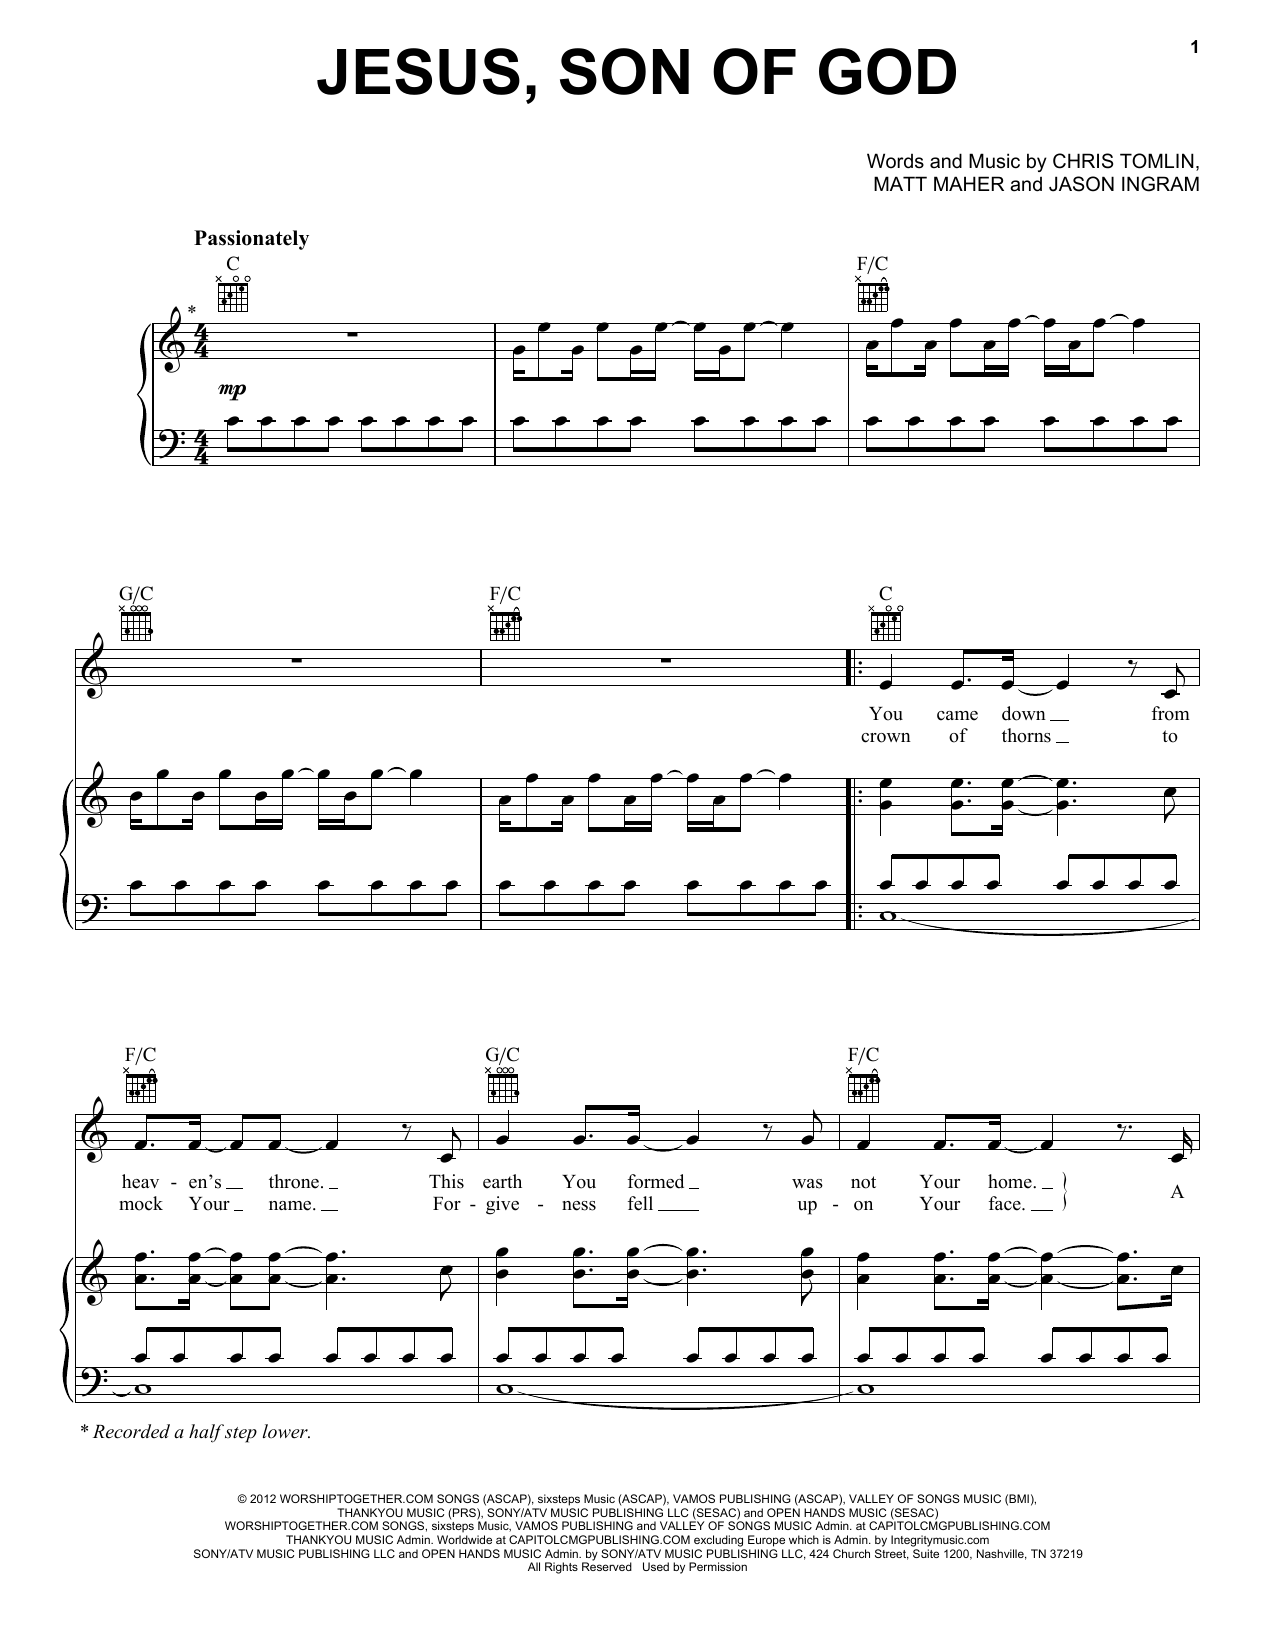 Download Passion Jesus, Son Of God Sheet Music